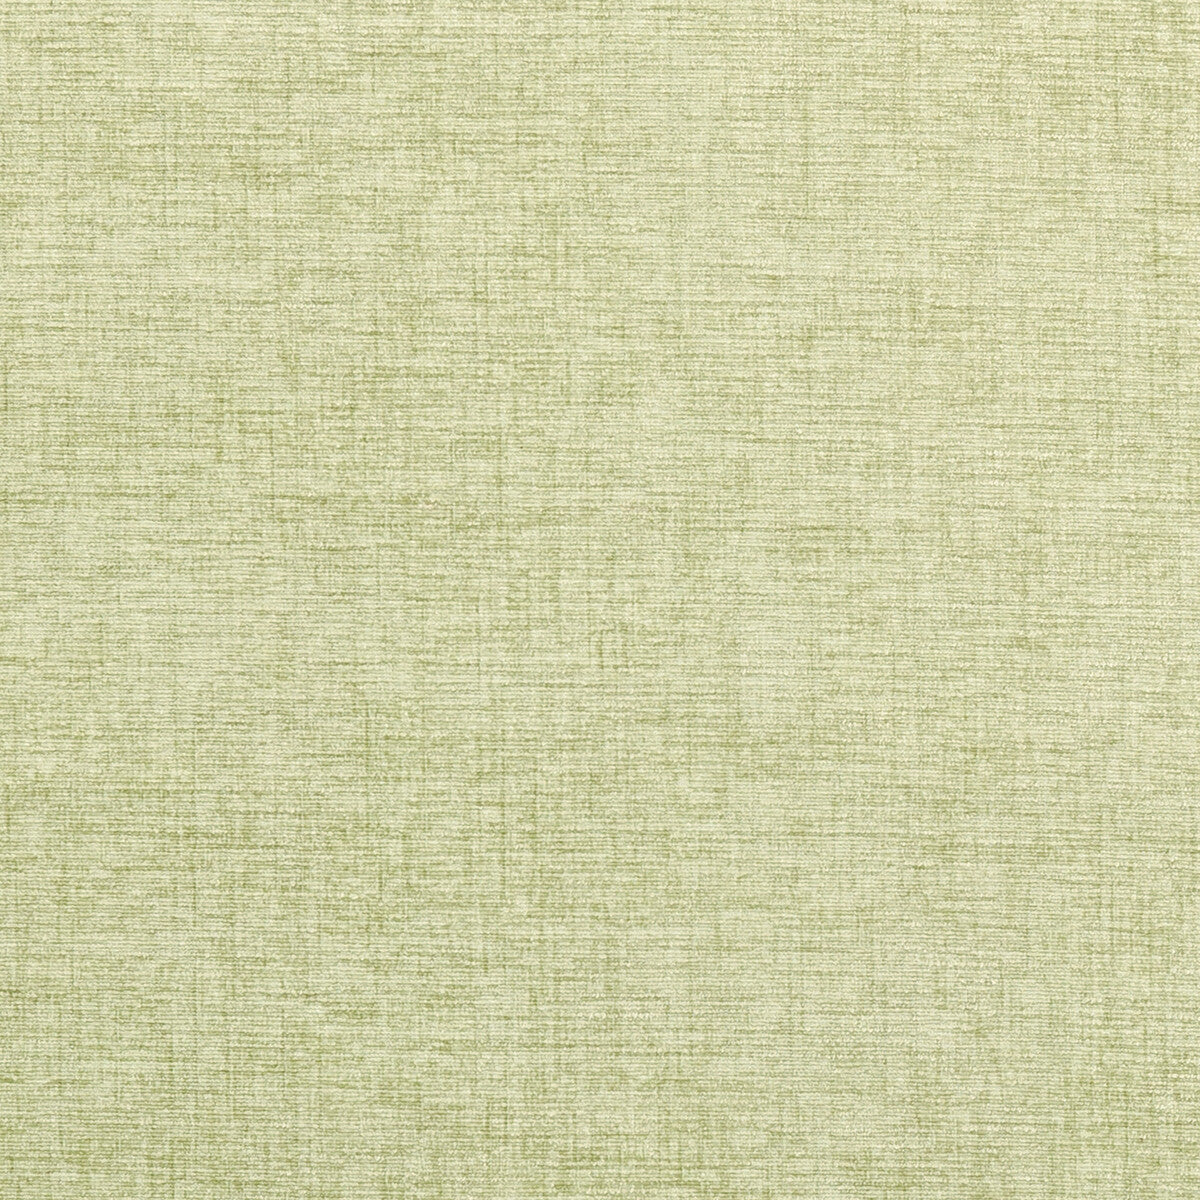 Karina fabric in celadon color - pattern F0371/08.CAC.0 - by Clarke And Clarke in the Clarke &amp; Clarke Karina collection